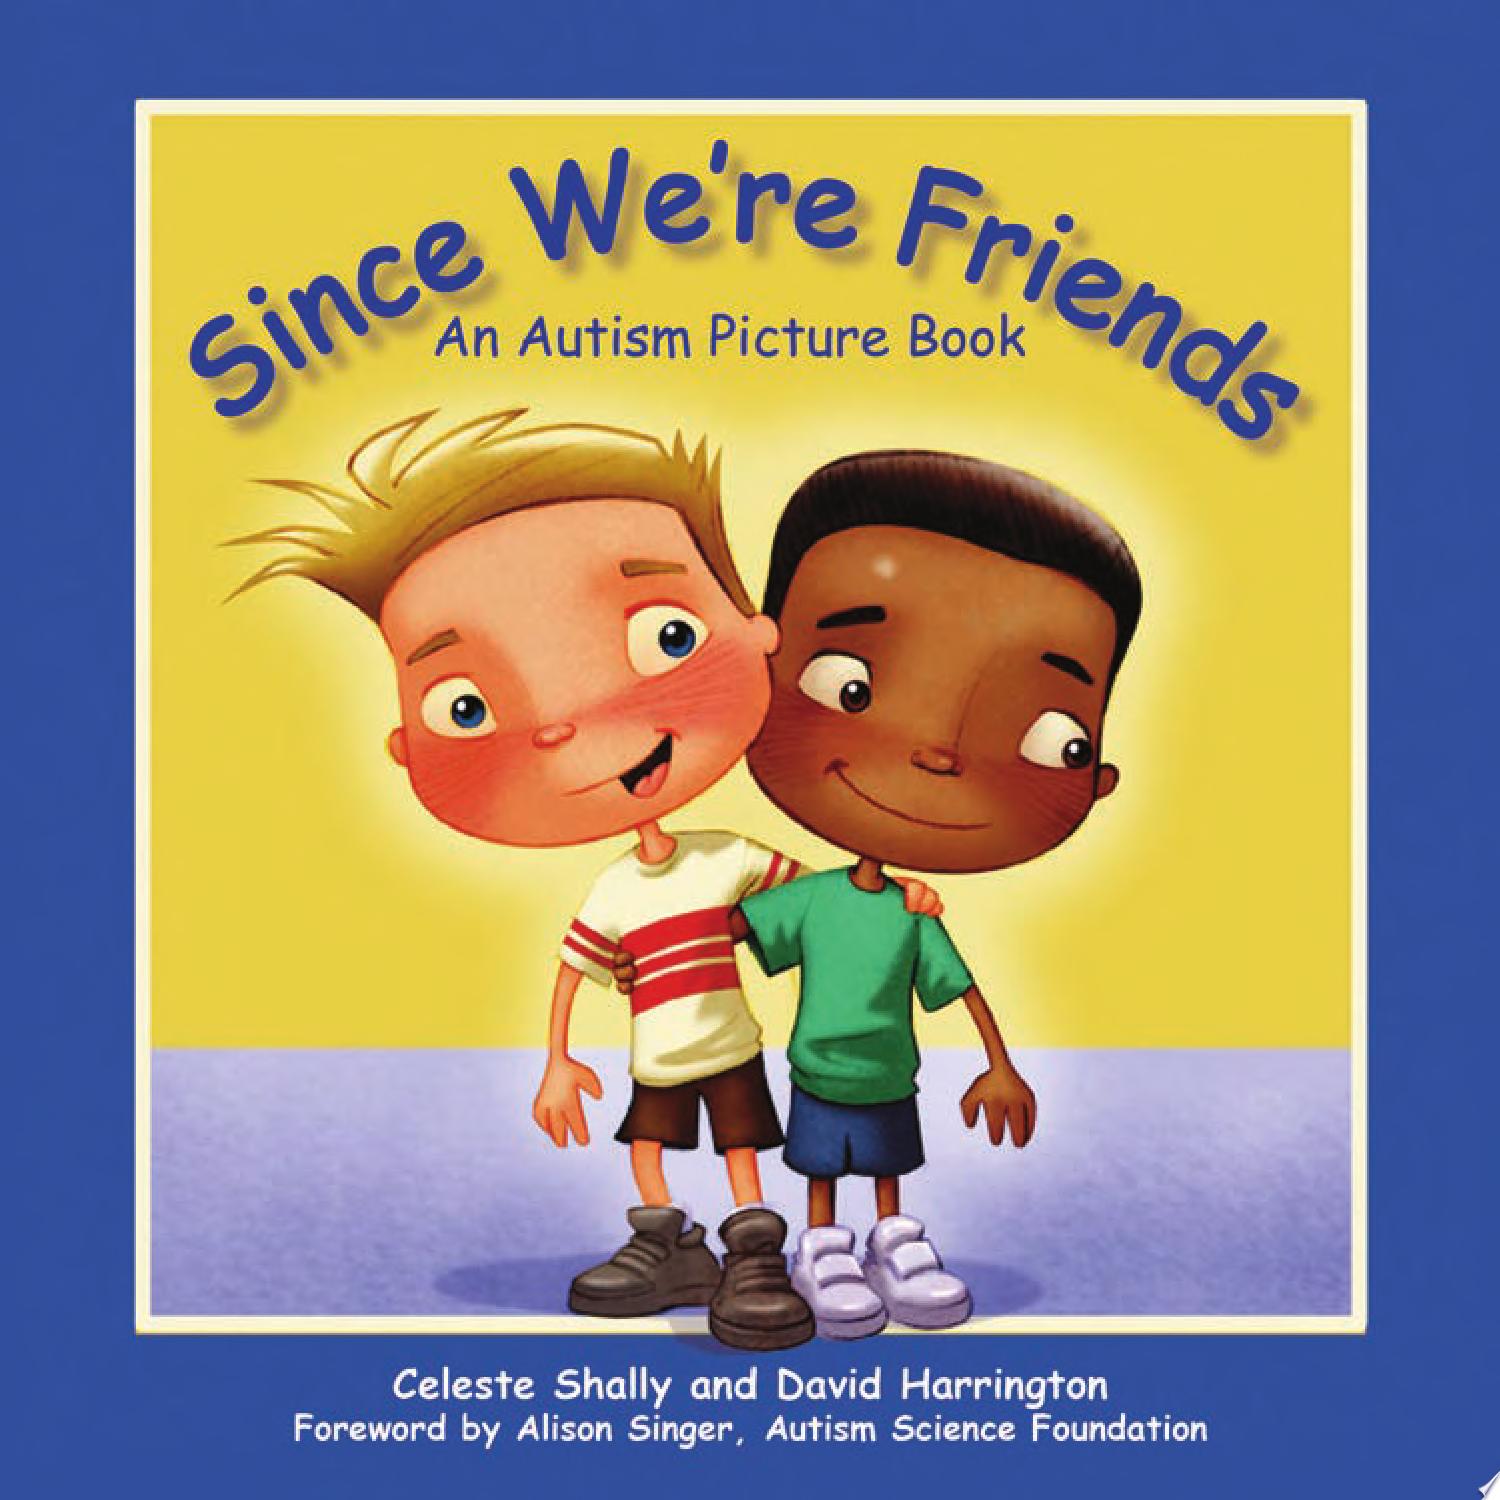 Image for "Since We're Friends: an autism picture book"